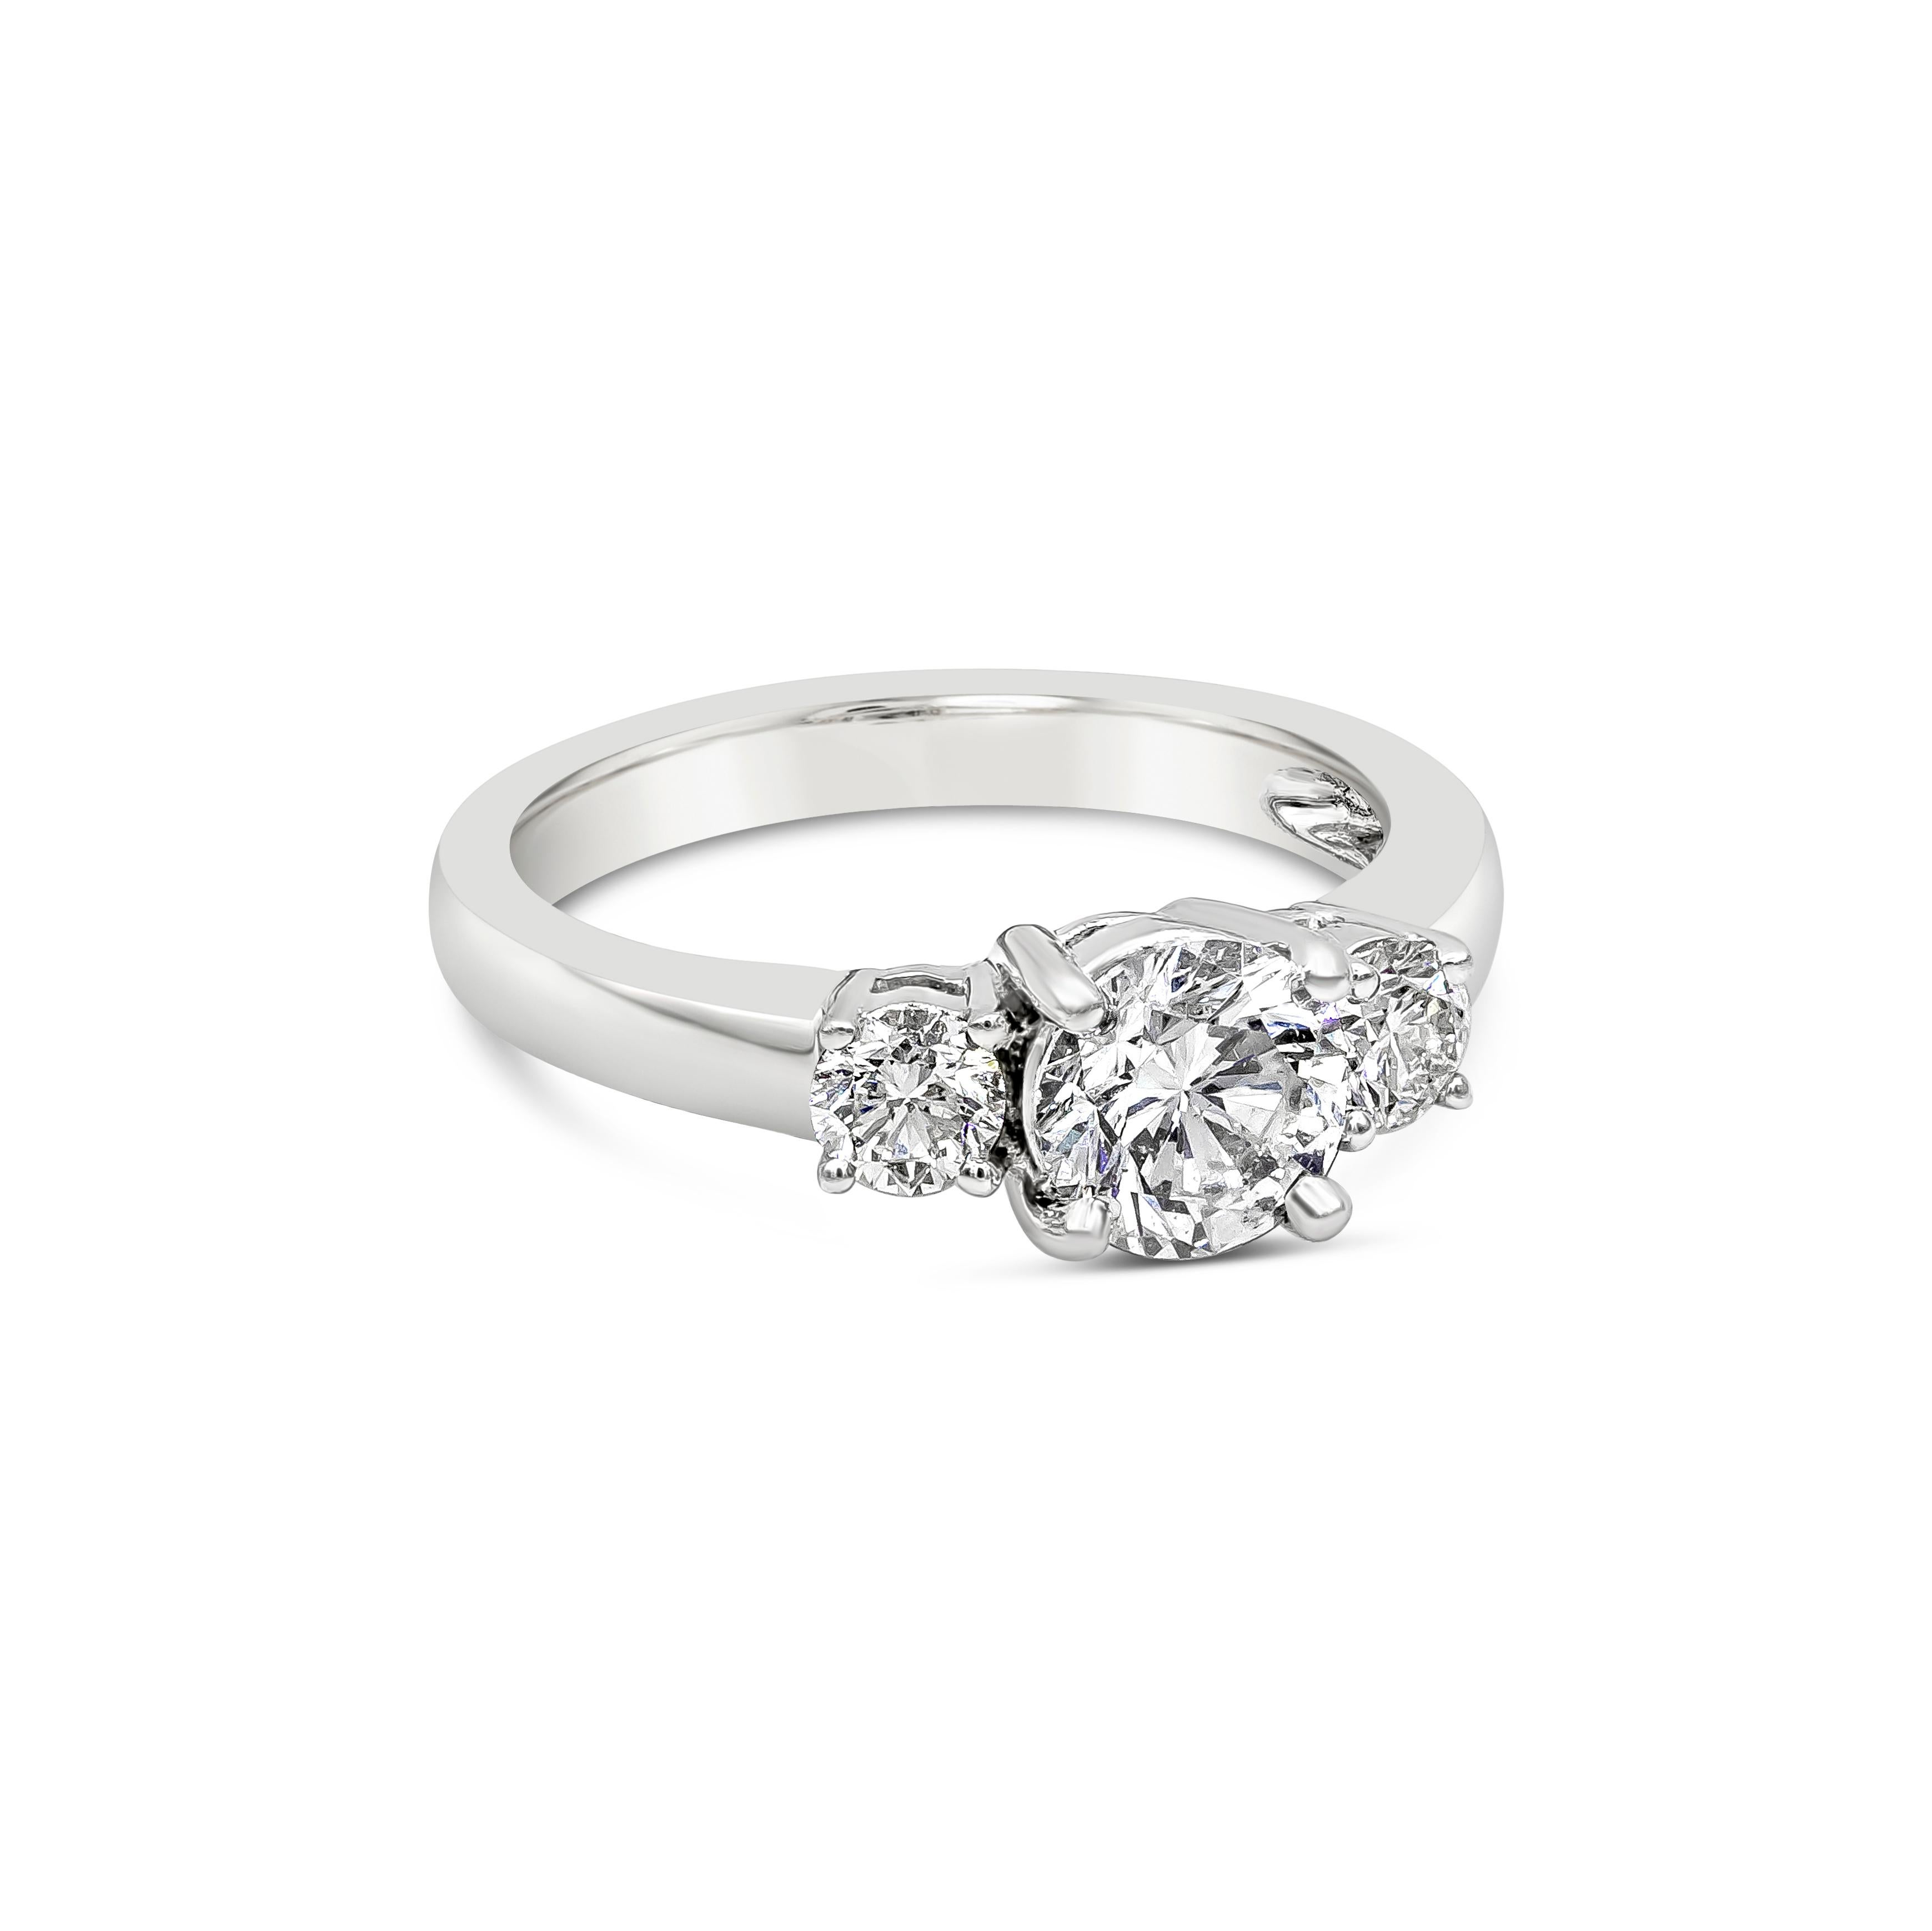 A luxurious round diamond three-stone engagement ring will always be timeless. This ring showcases a GIA certified center stone that weighs at 1.02 carat. Round diamond is certified with D color and SI2 clarity. Flanked by a smaller brilliant round